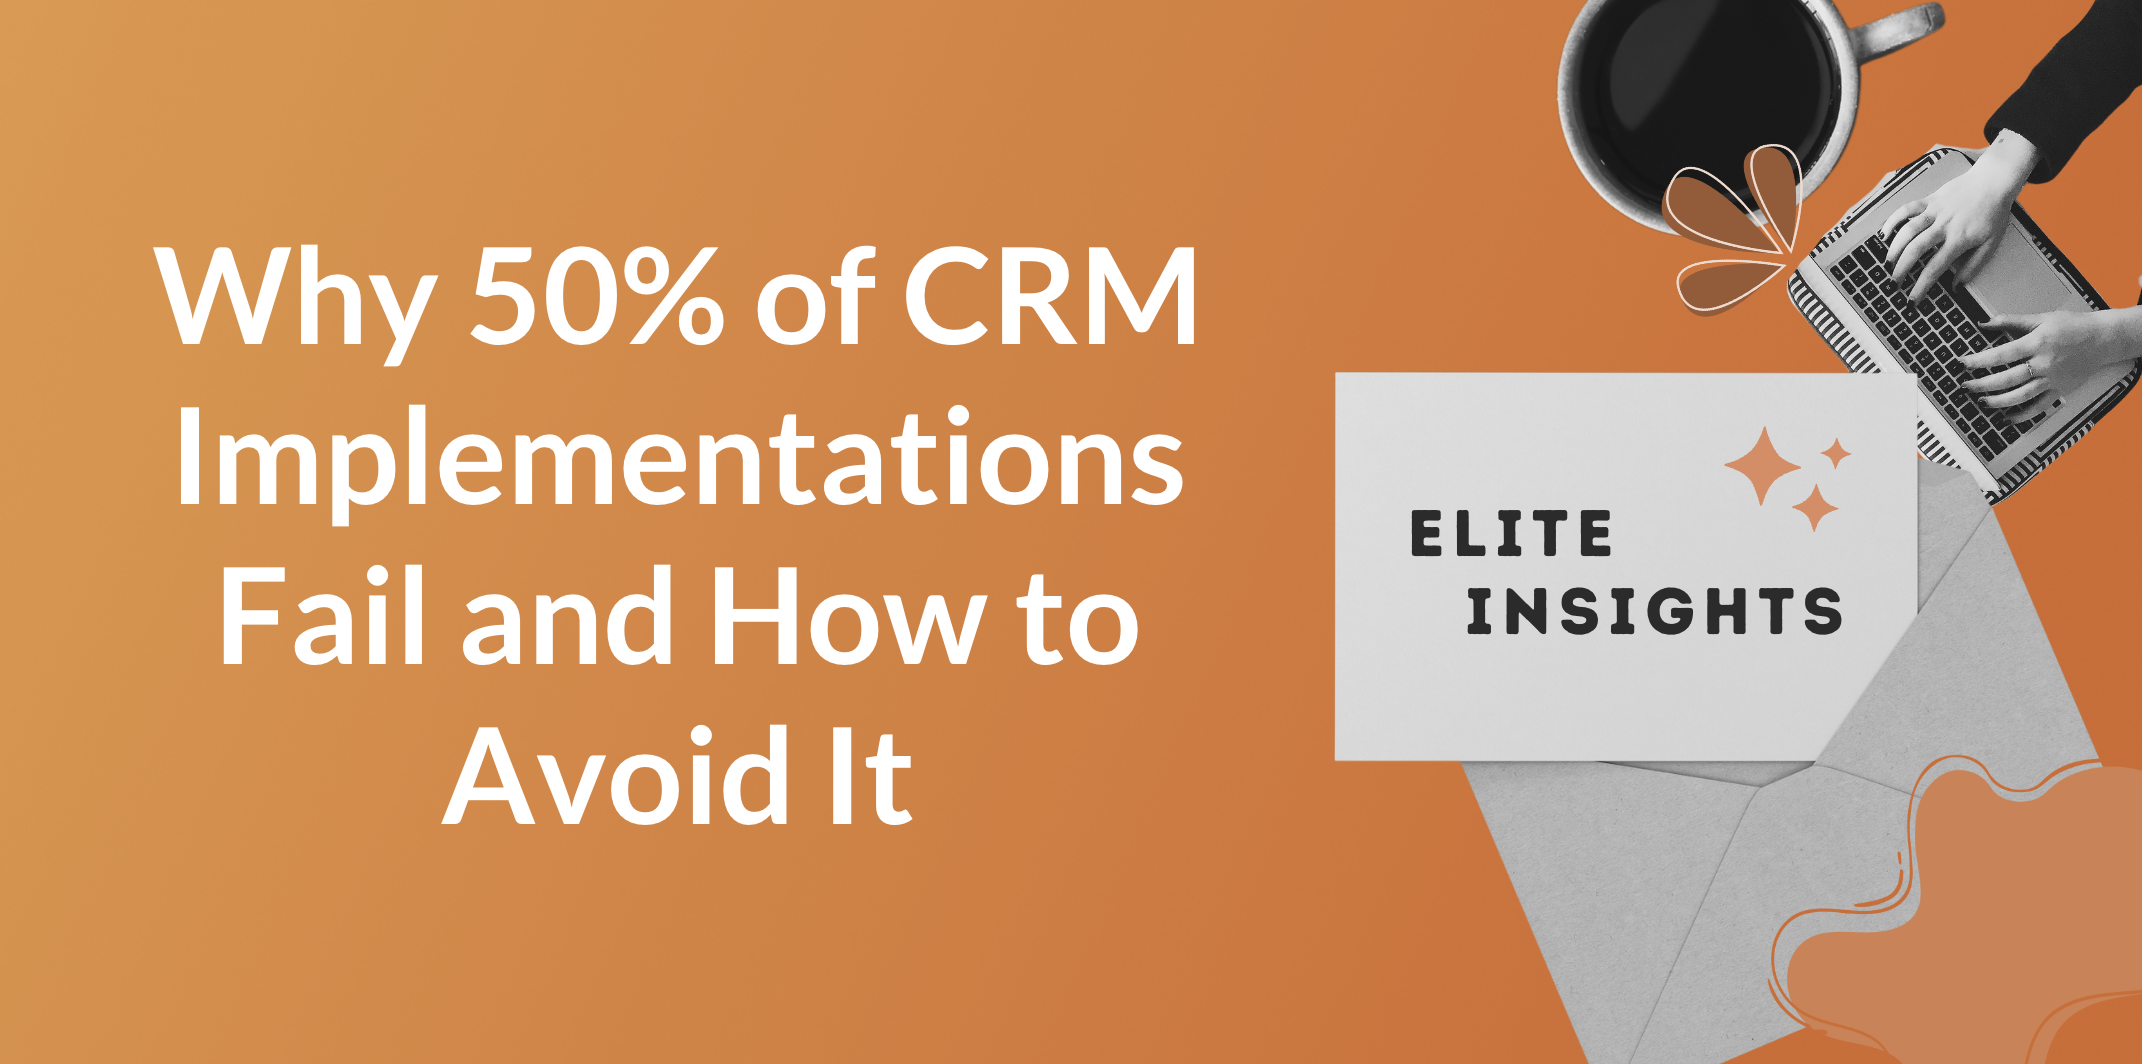 Why 50% of CRM Implementations Fail and How to Avoid It